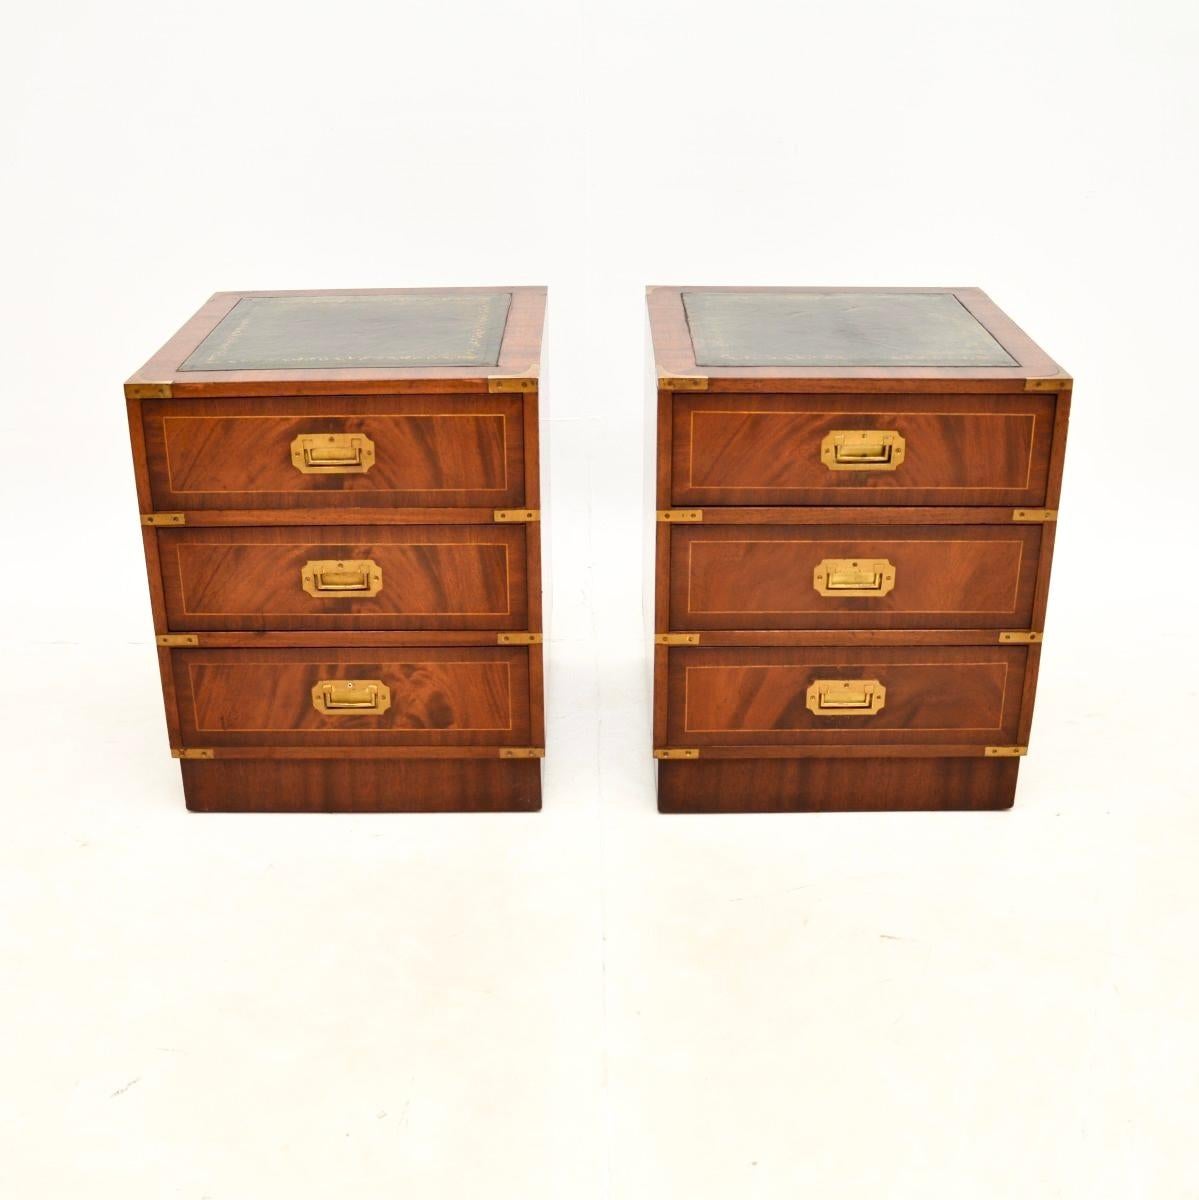 A smart and very useful pair of antique military campaign style bedside chests. They were made in England, and date from around the 1950’s.

They are of super quality and are a great size. They have inset tooled leather tops, the drawers have brass